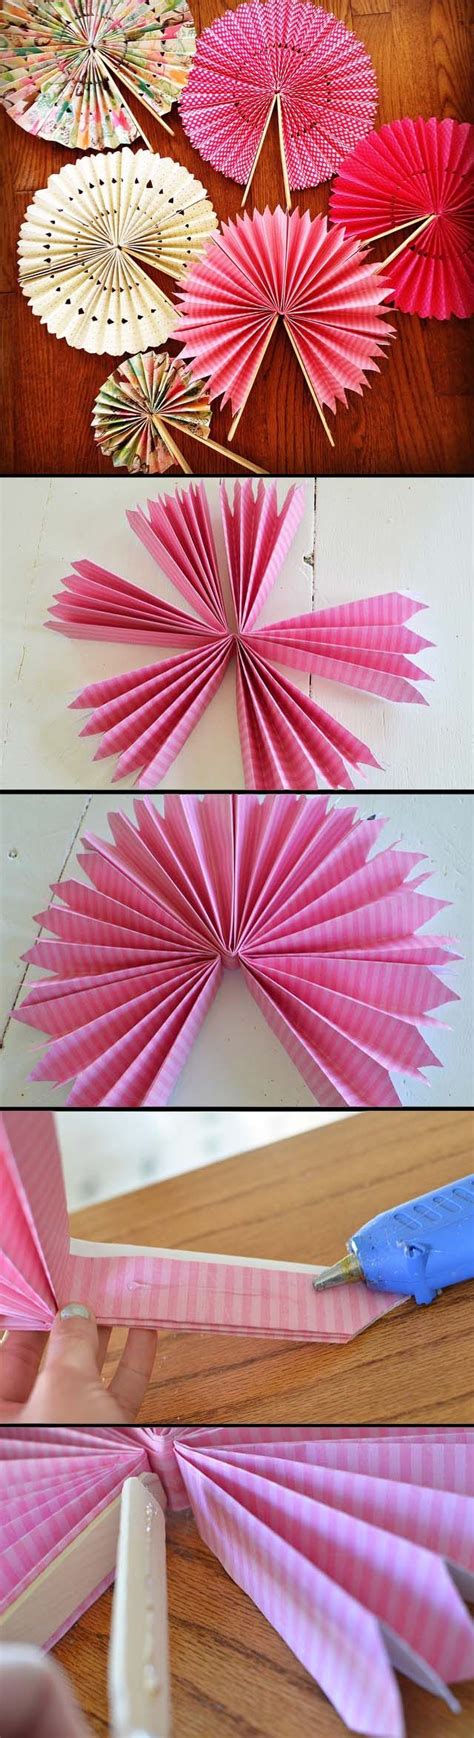 The Steps To Make An Origami Flower Out Of Tissue Paper Are Shown In